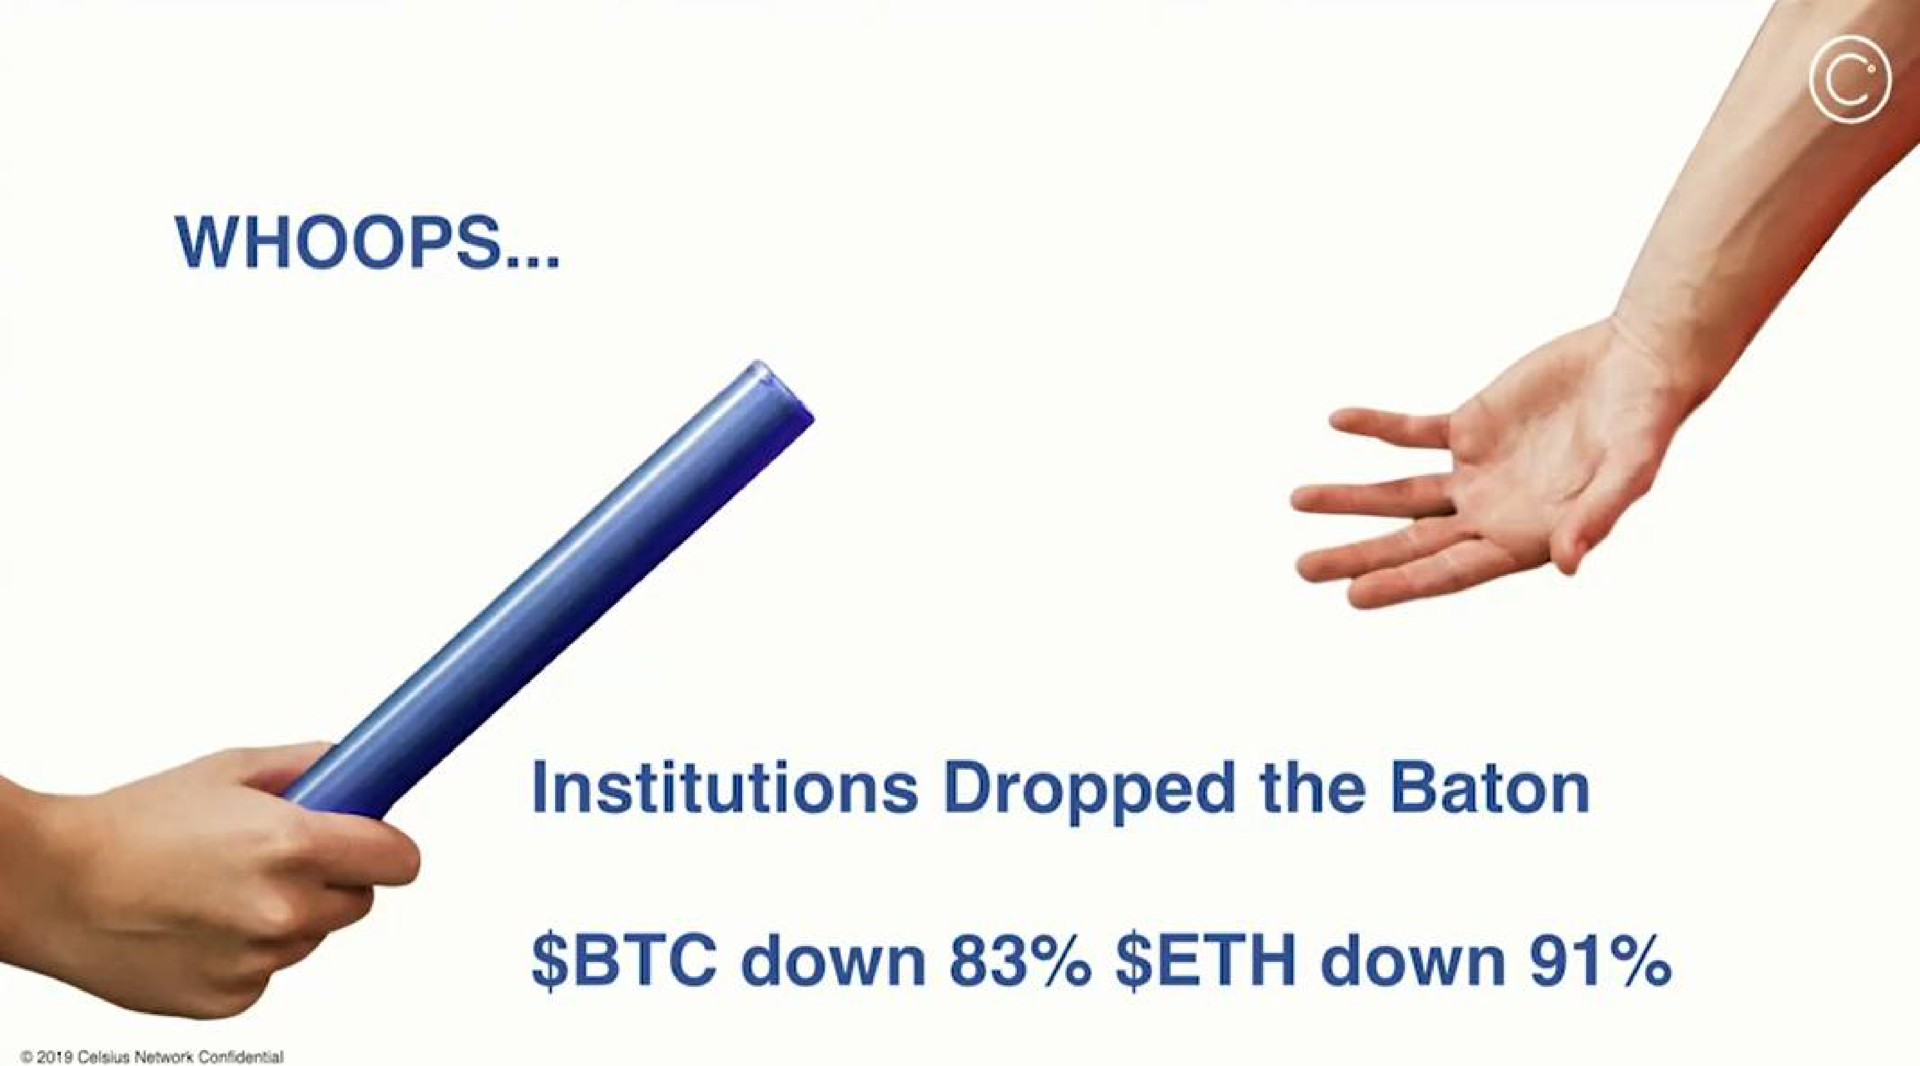 whoops institutions dropped the baton down down | Celsius Network